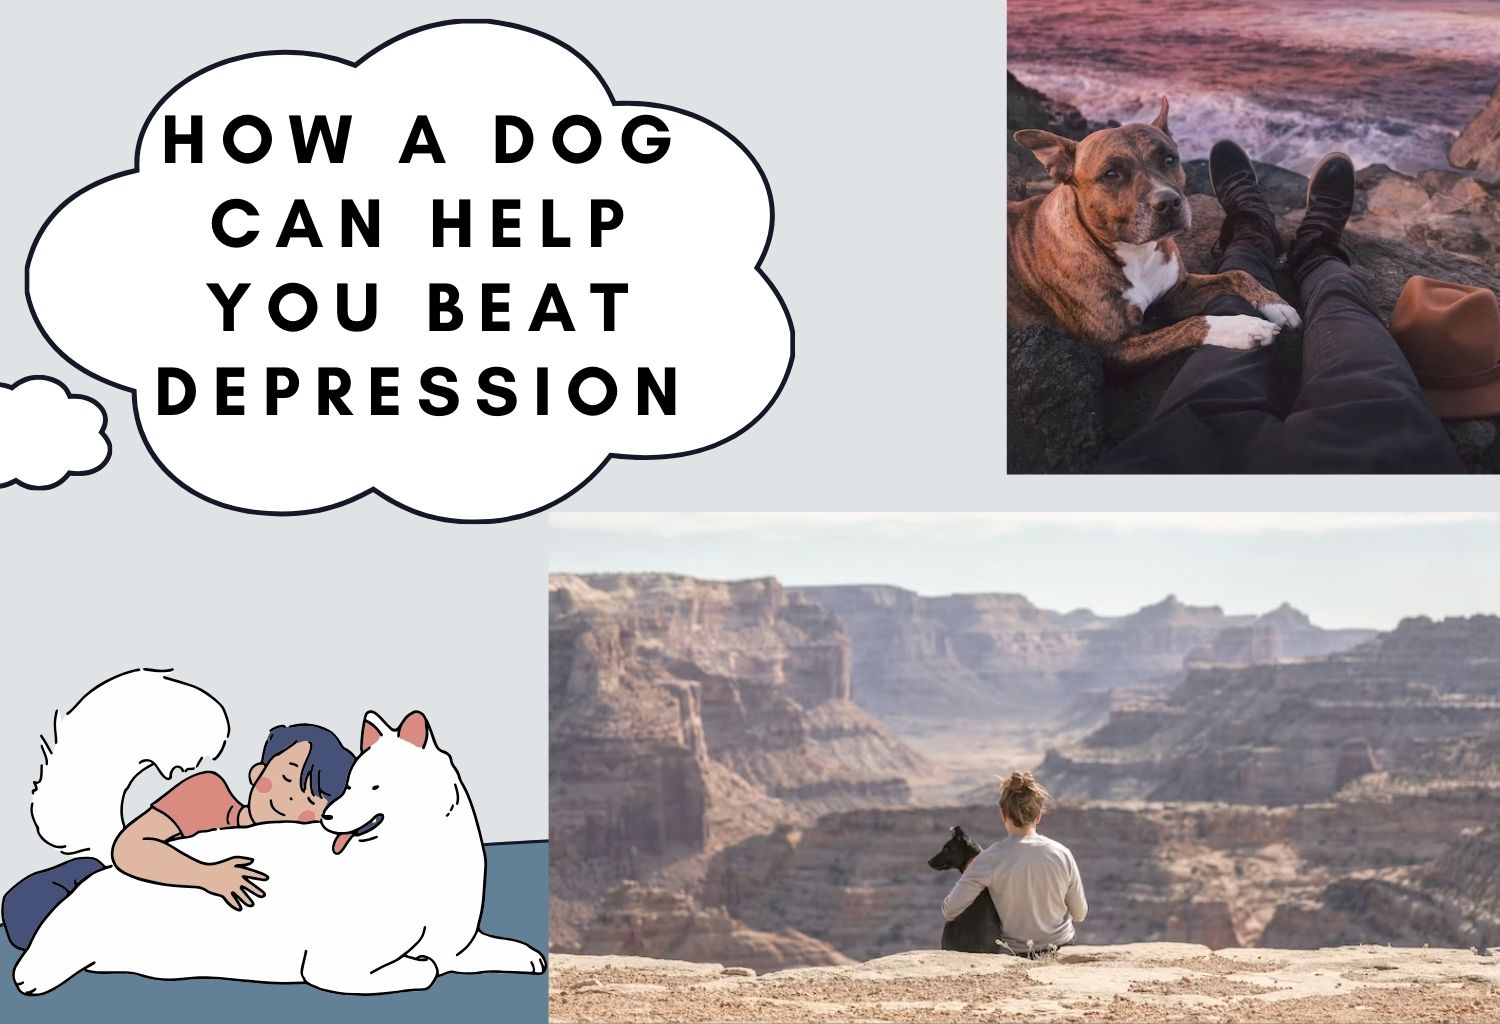 How a Dog Can Help You Beat Depression